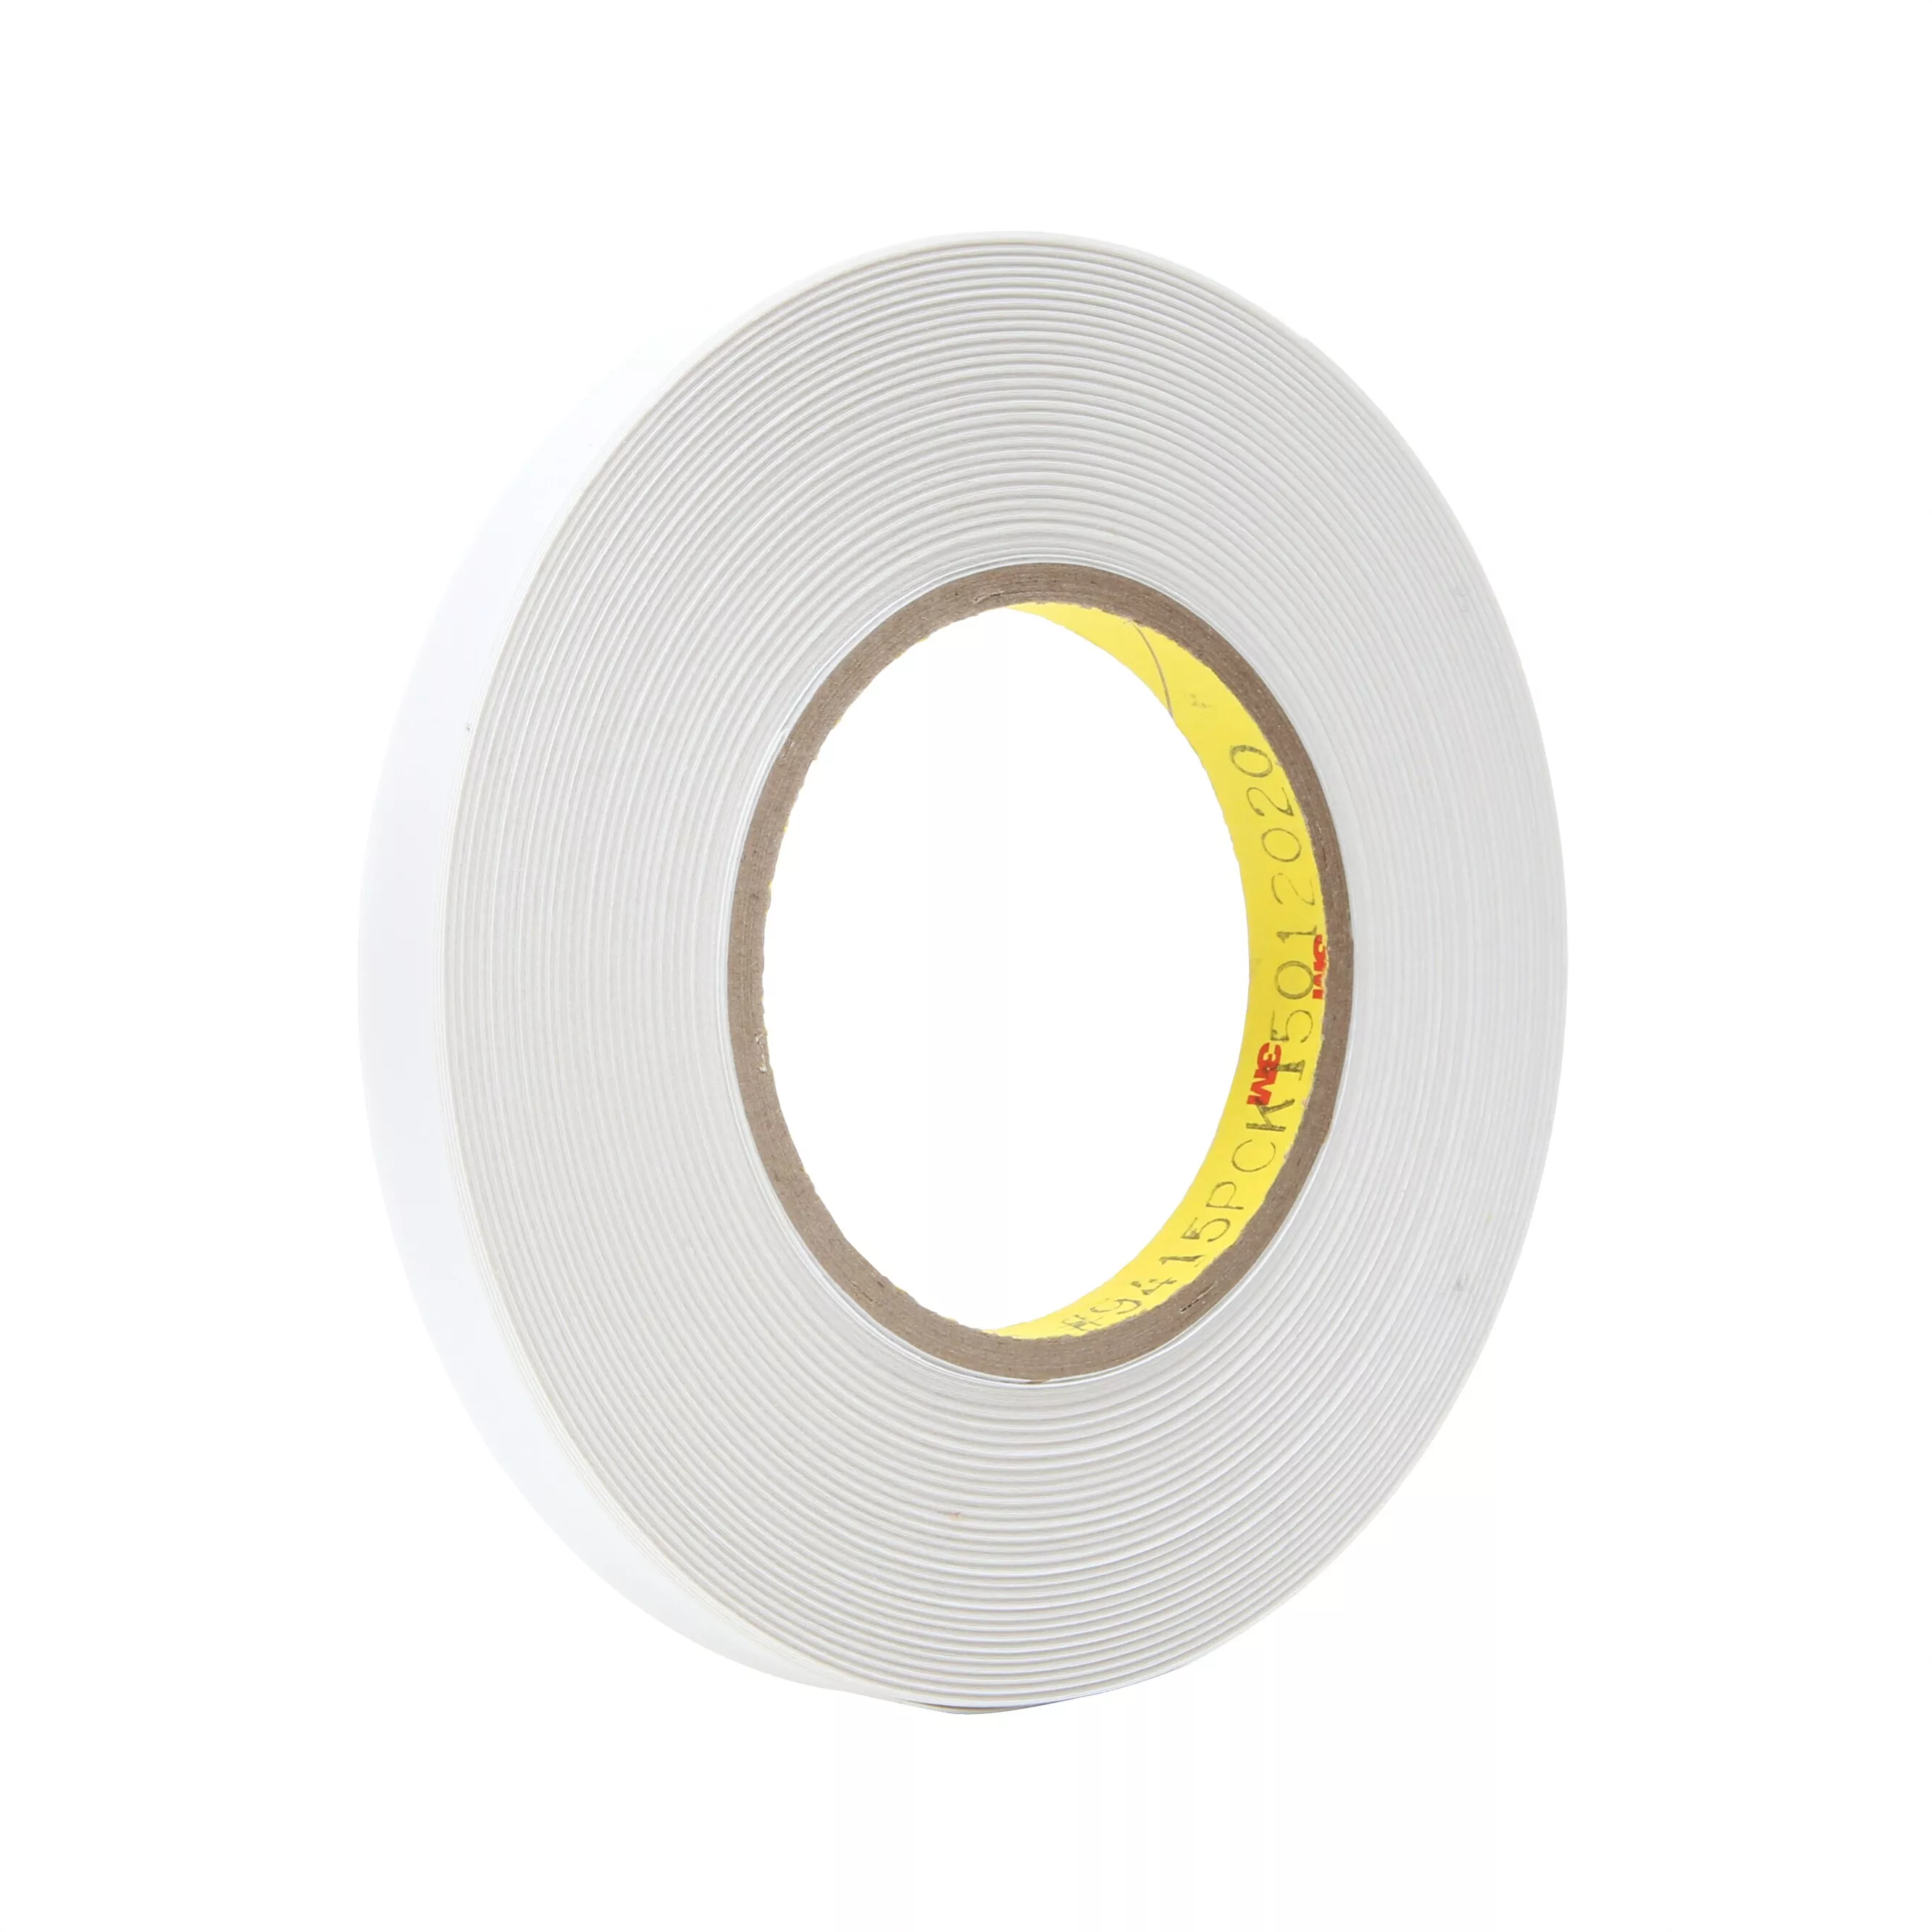 3M™ Removable Repositionable Tape 9415PC, Clear, 1/2 in x 360 yd, 2 mil,
18 Rolls/Case